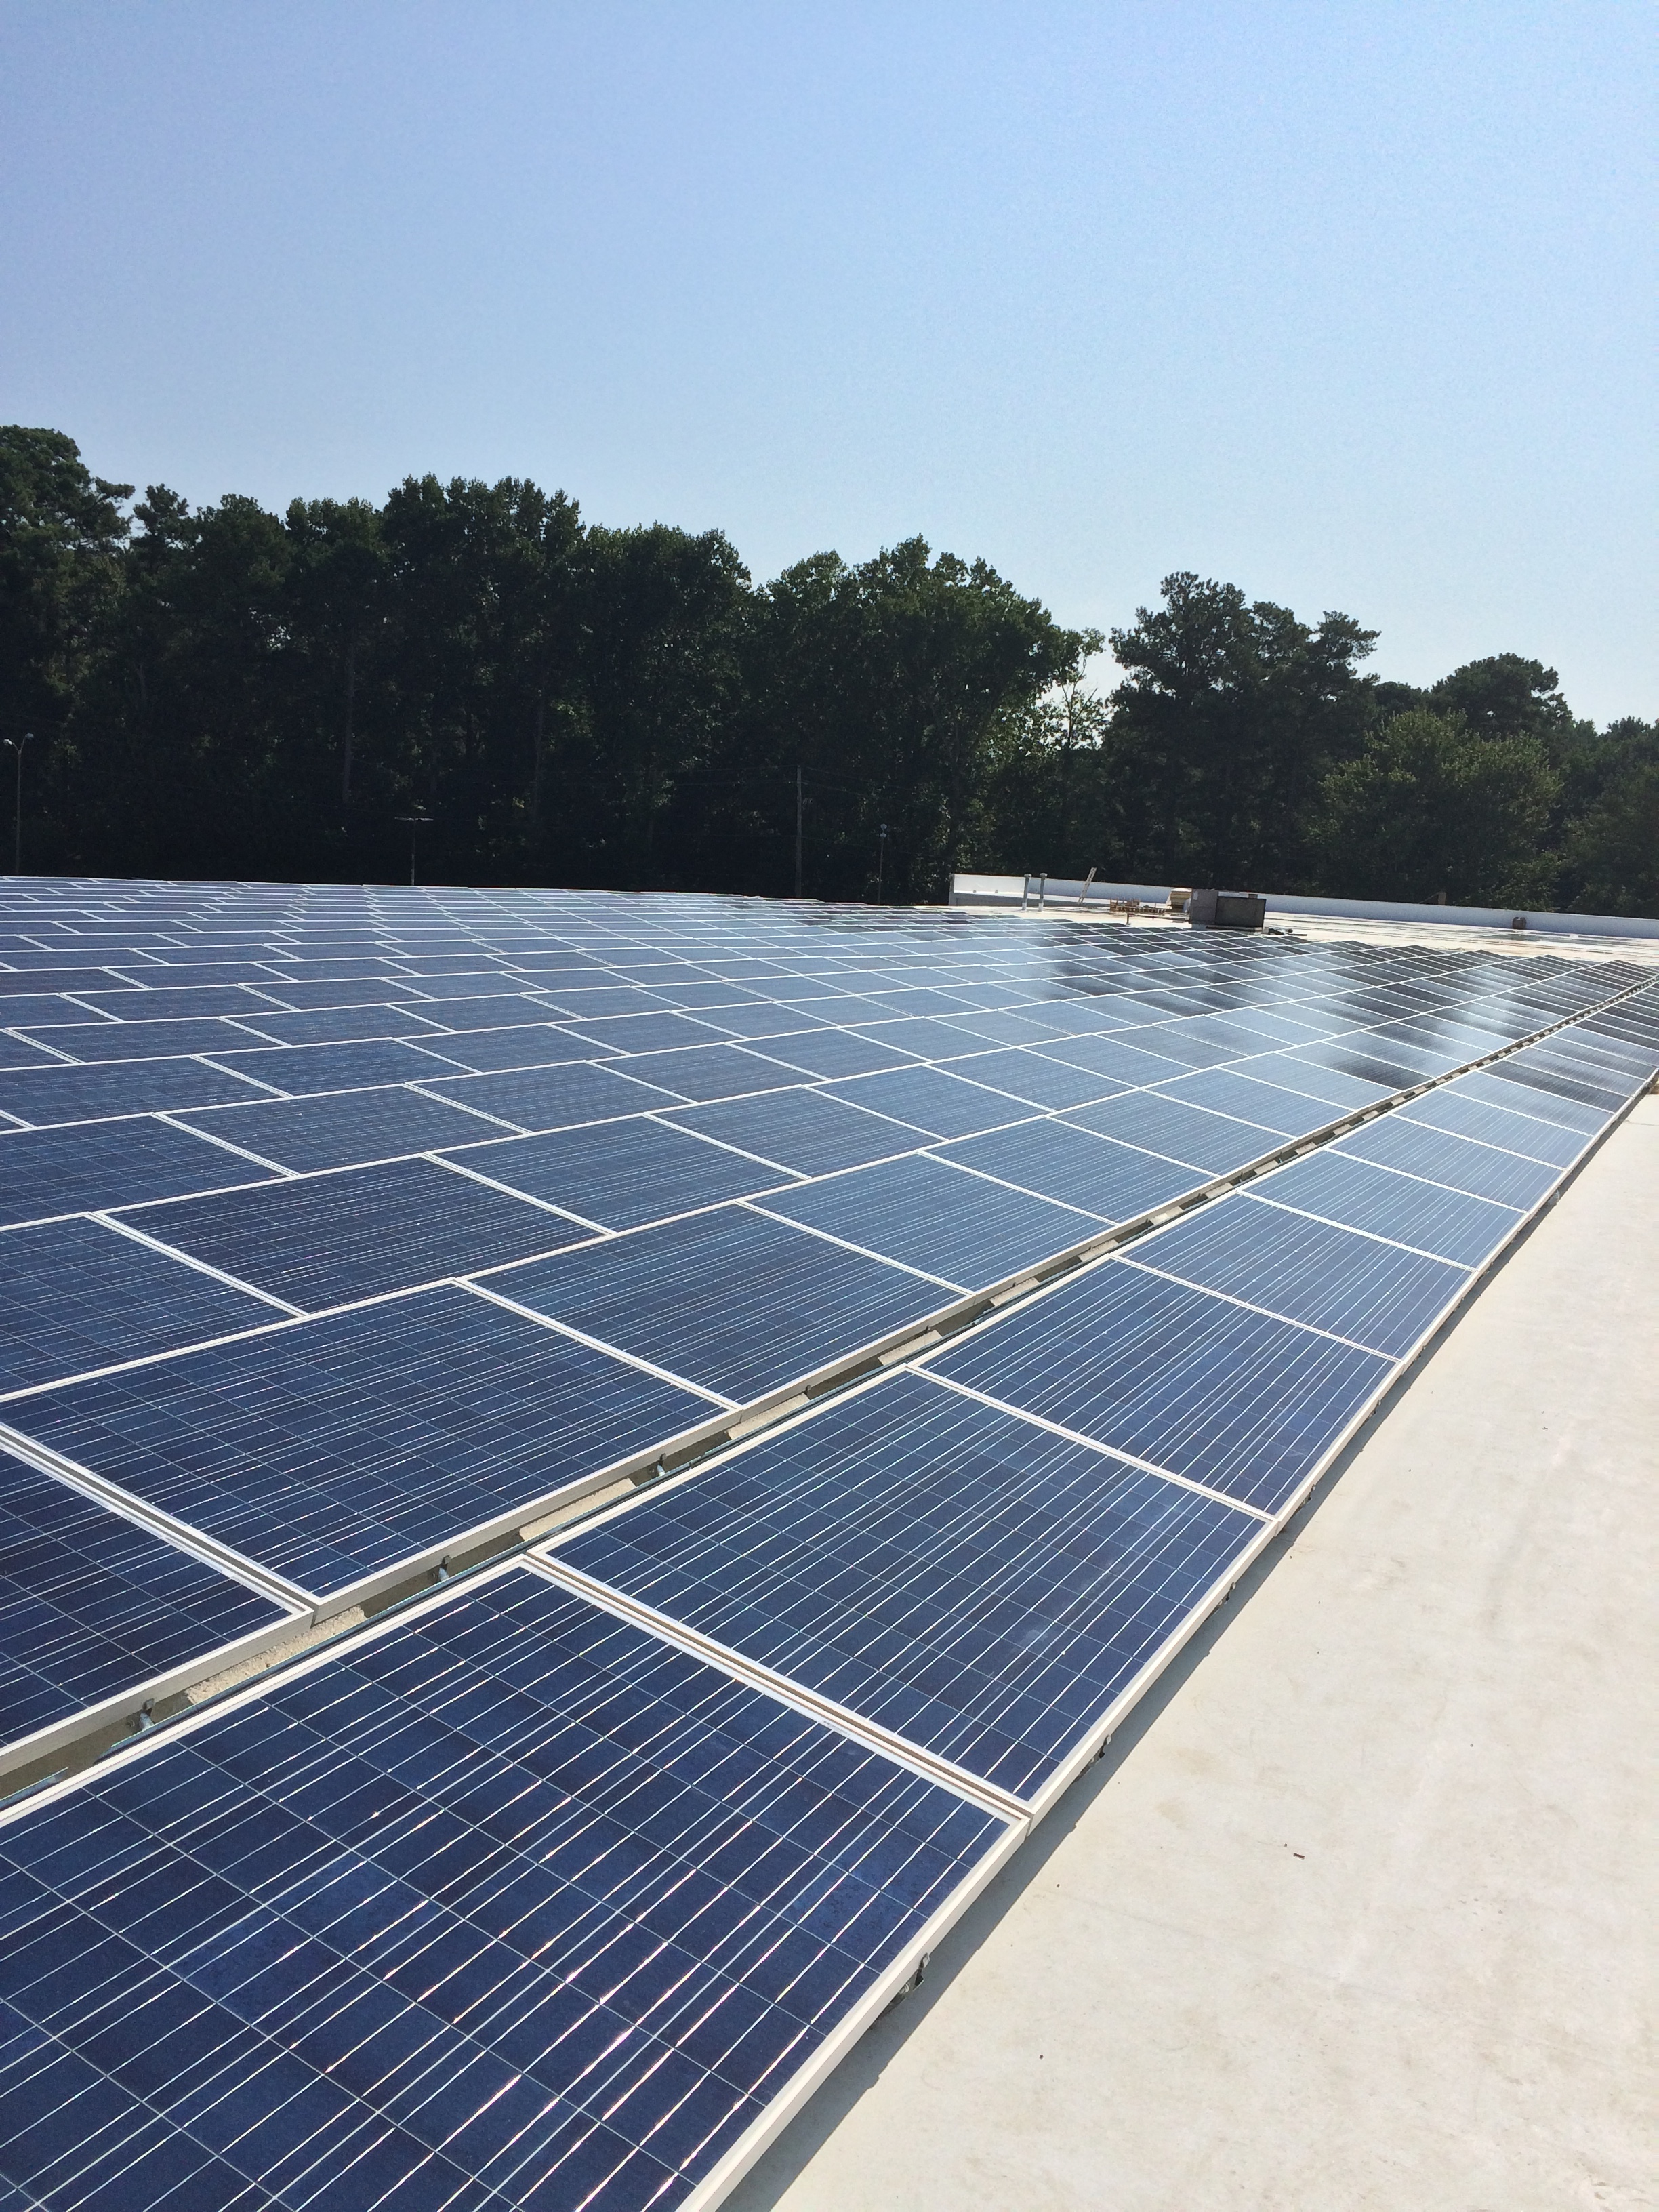 The solar project took two weeks to construct and will generate over 155,000 KW hours of energy annually.